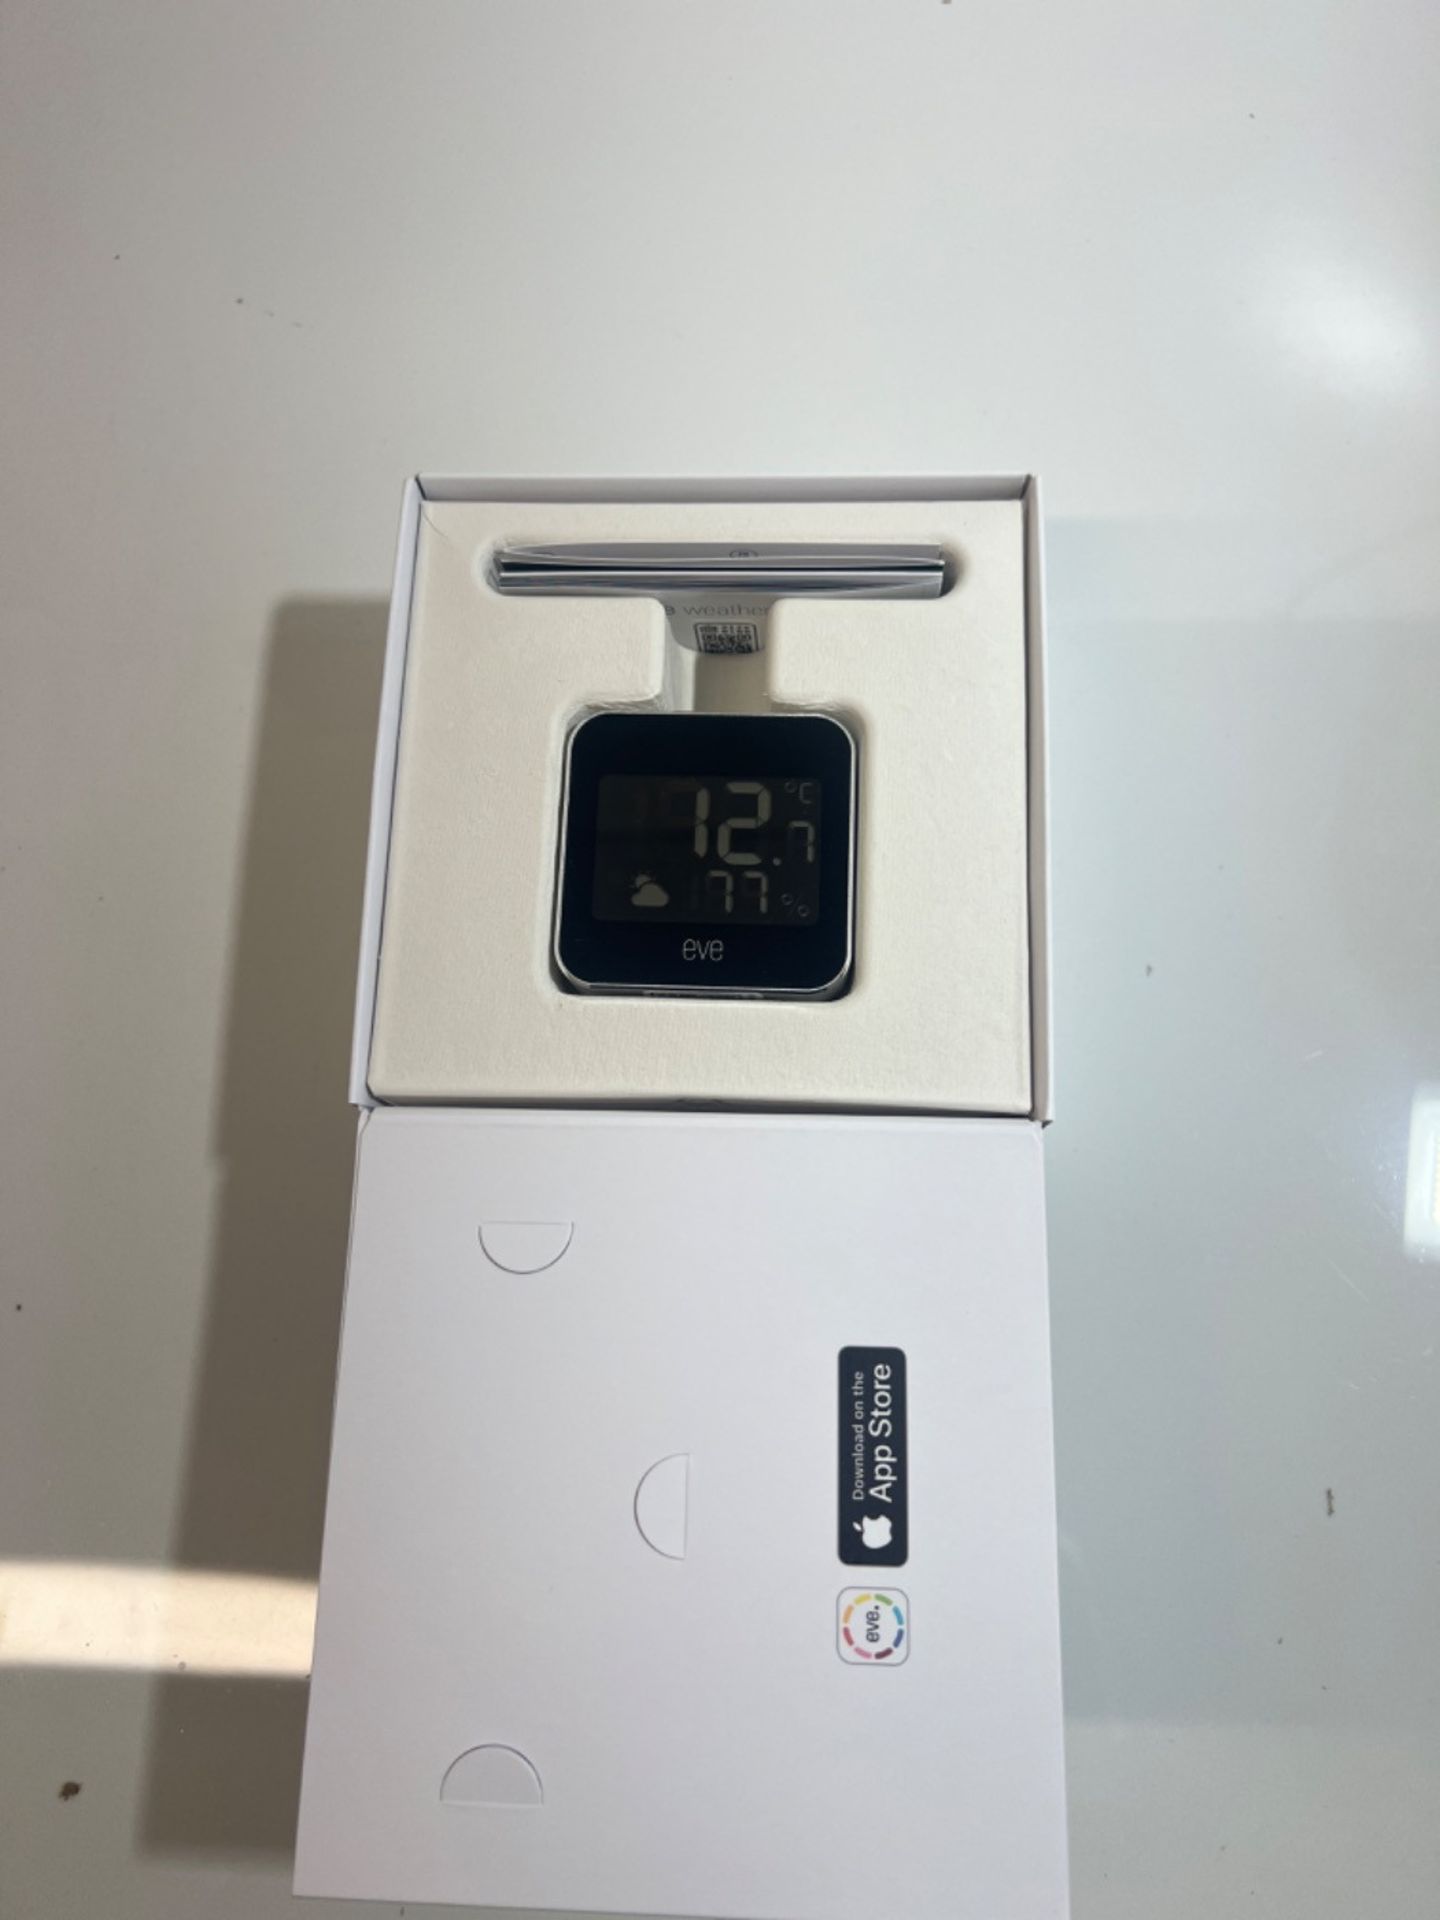 Eve Weather - Connected Weather Station wit Apple HomeKit technology for tracking temperature, humi